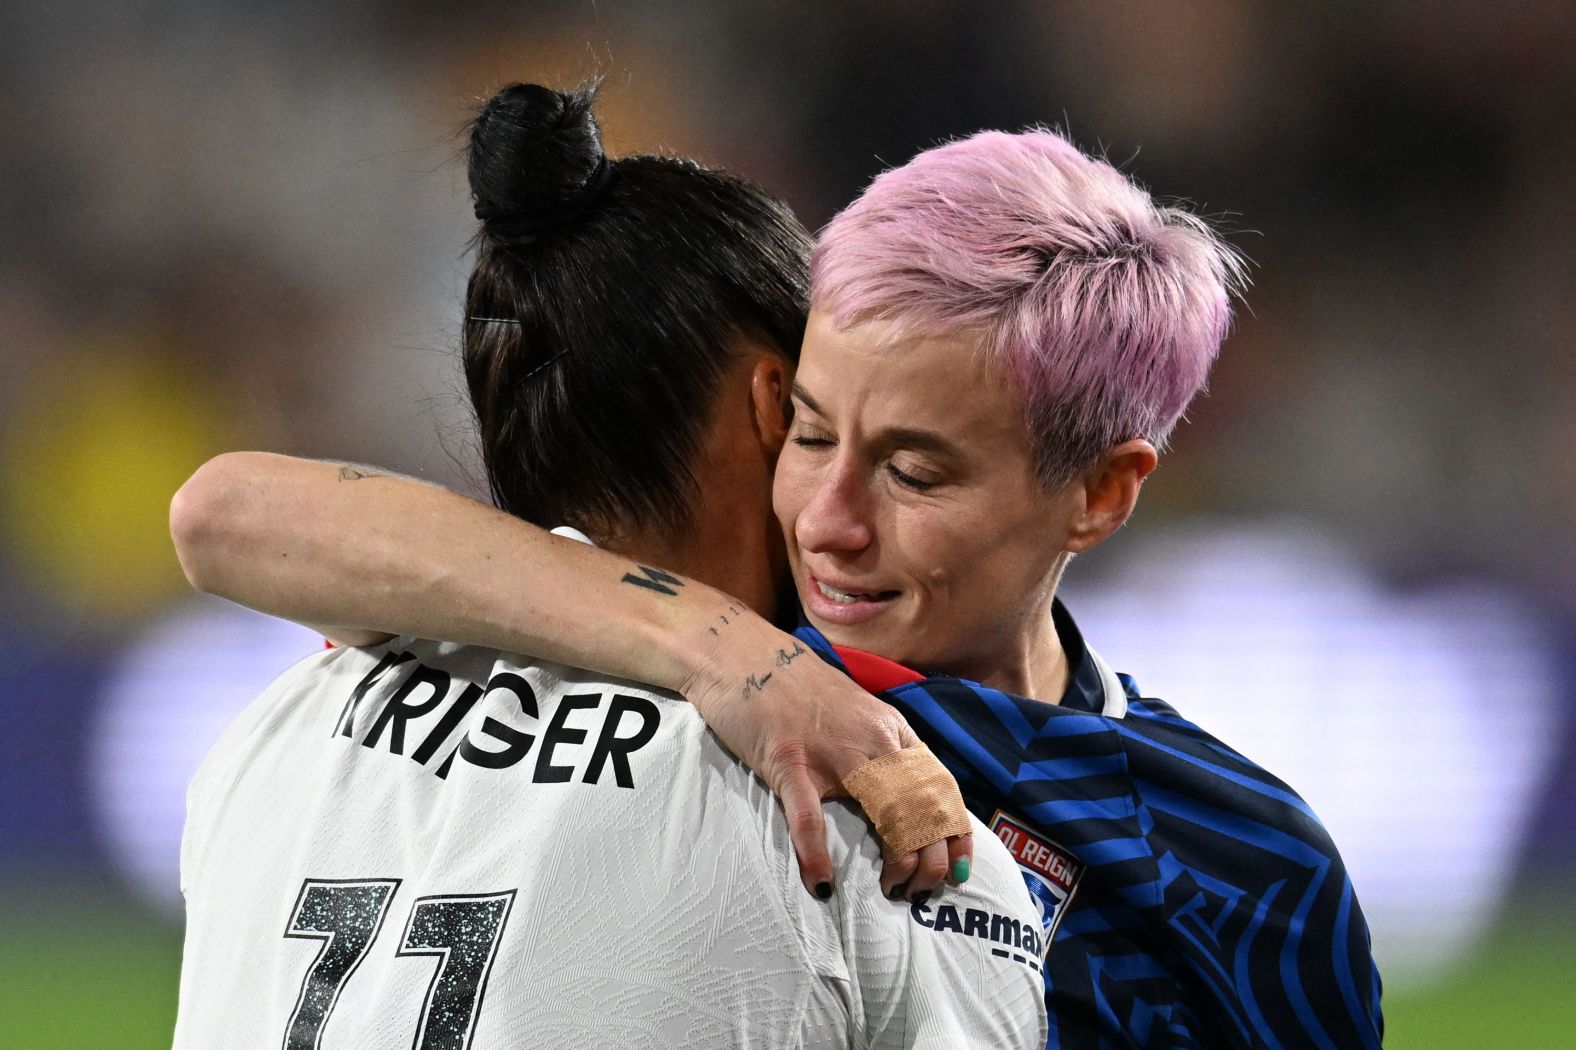 Rapinoe hugs Gotham FC's Ali Krieger during the National Women's Soccer League final match in San Diego in November 2023. Rapinoe<a href="https://www.cnn.com/2023/11/11/sport/megan-rapinoe-ali-krieger-nwsl-final-spt-intl/index.html" target="_blank"> limped out of the final game of her storied career</a>, suffering an apparent ankle injury less than three minutes into the match. Krieger, another US soccer legend and Rapinoe's longtime teammate on the US Women's National Team, also announced her retirement from professional soccer at the end of the 2023 NWSL season.